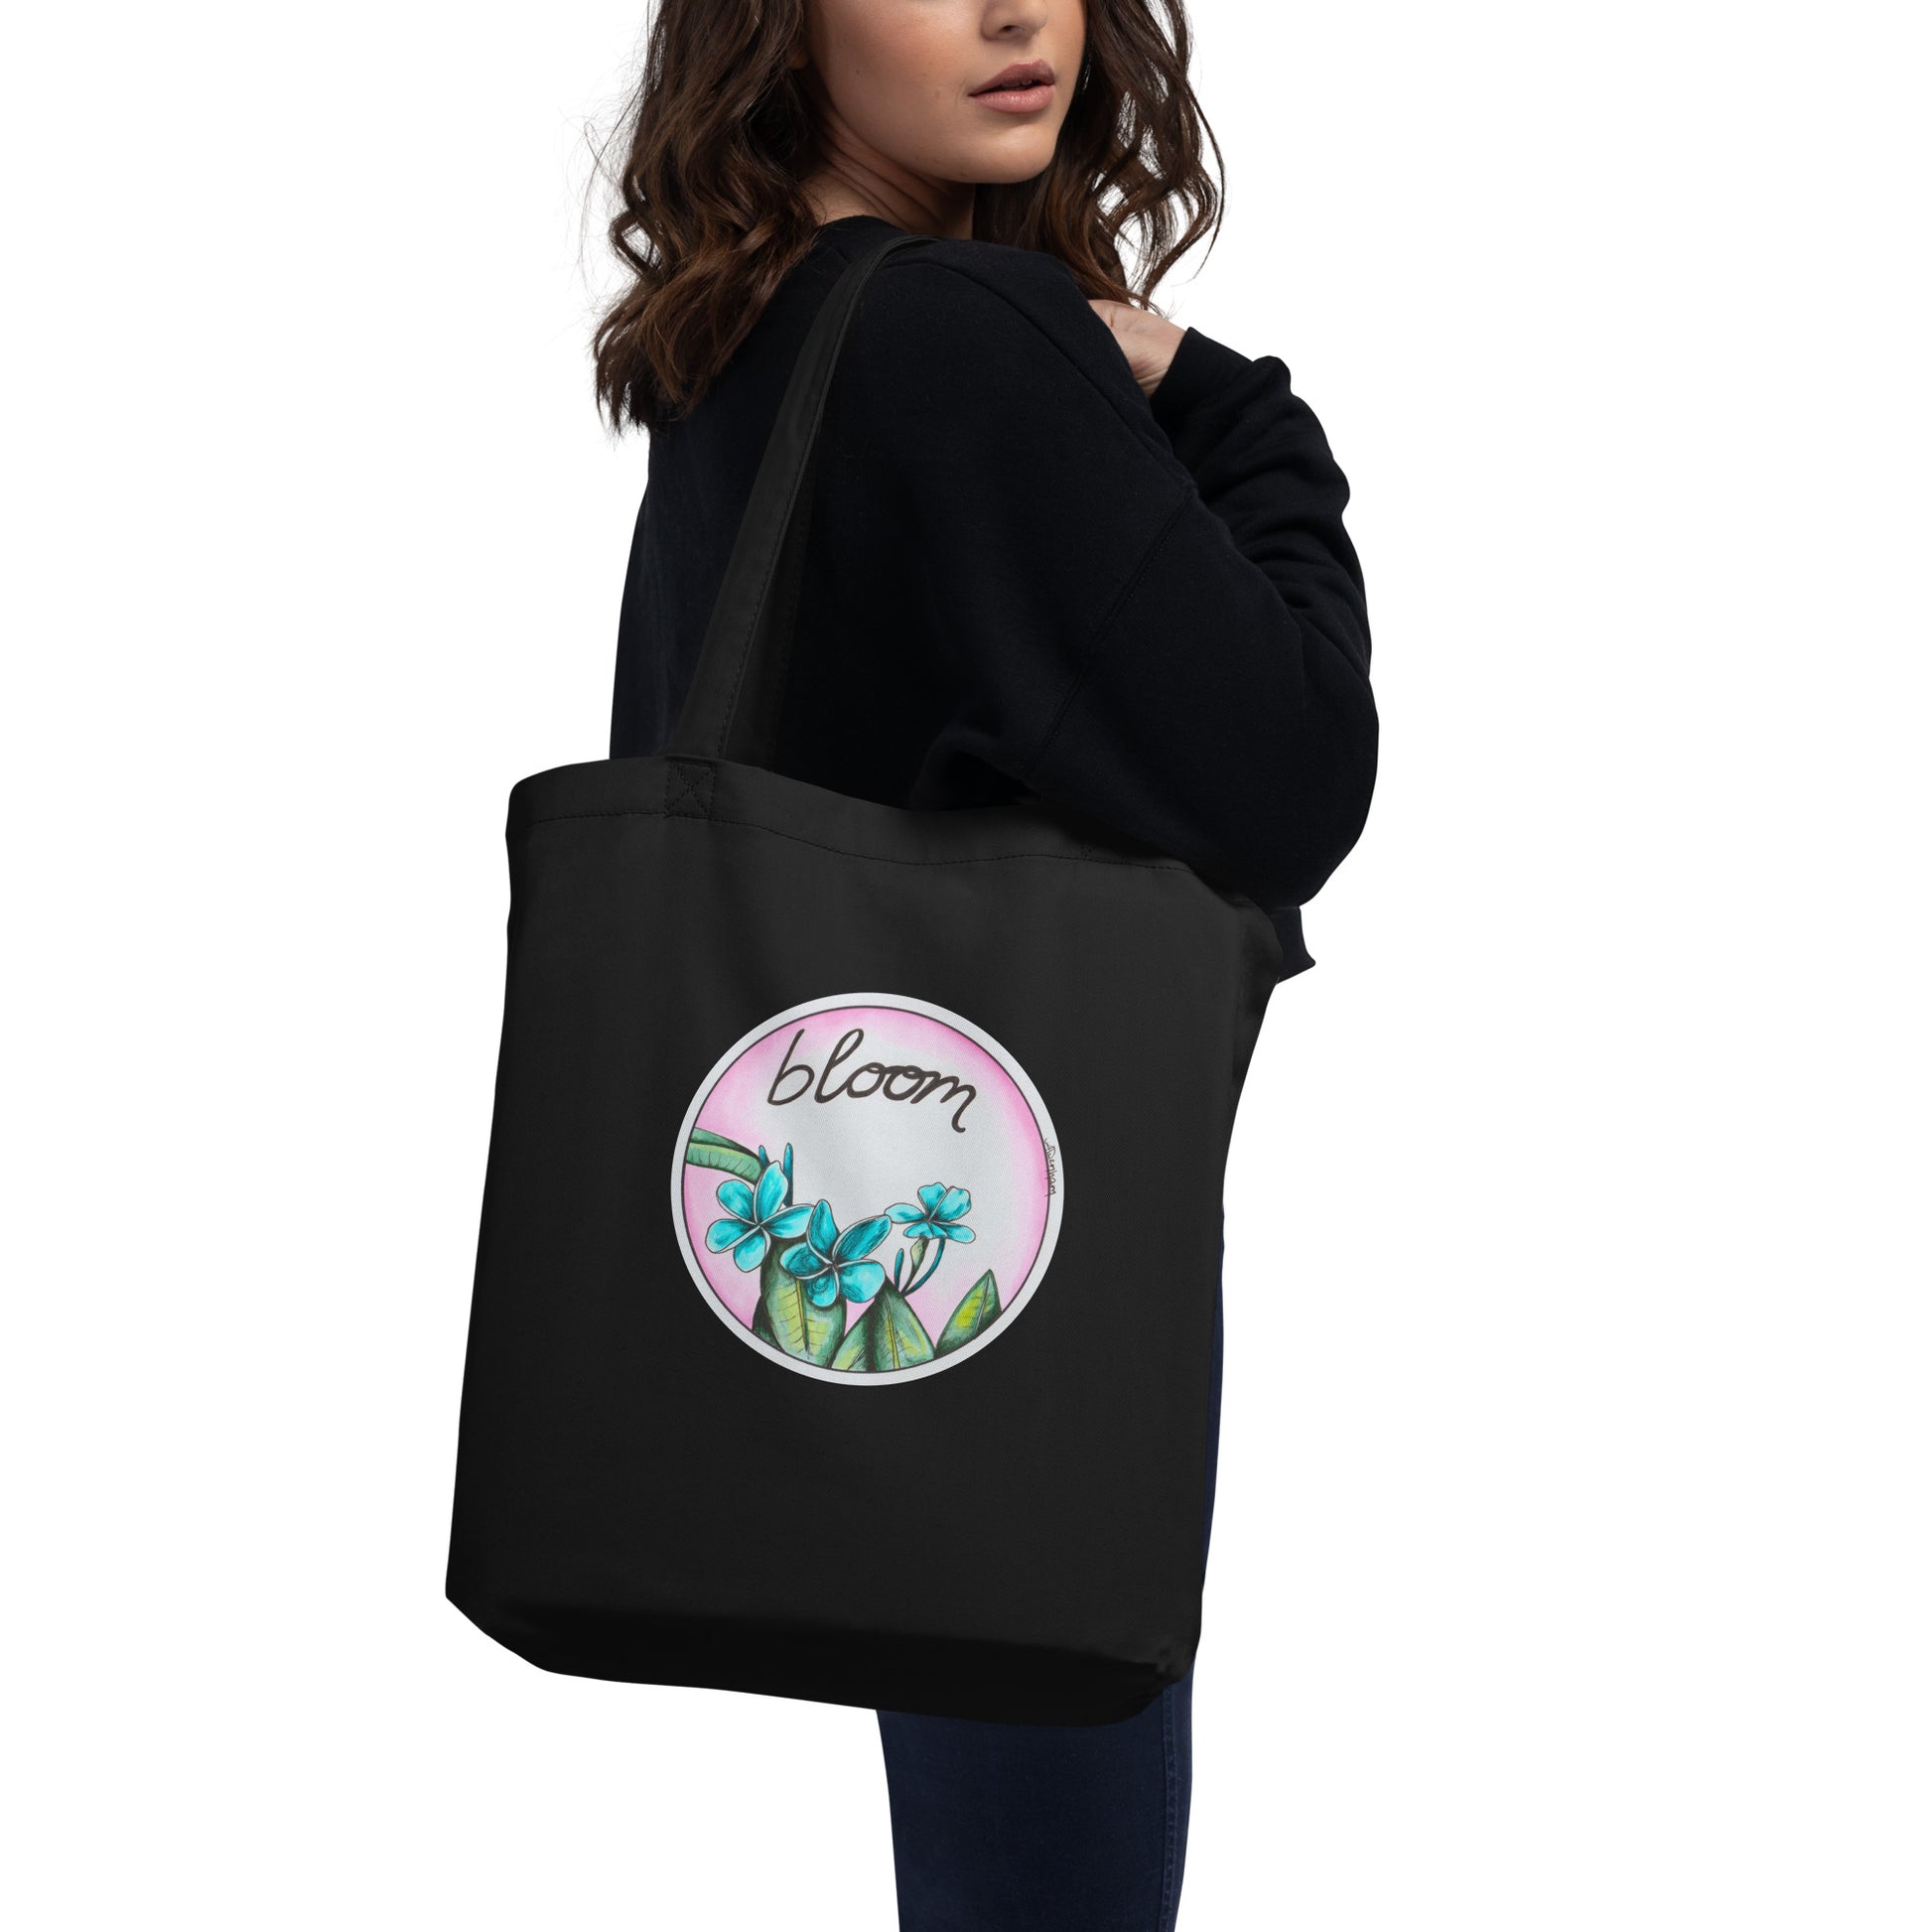 Amy-Lynn Denham's hand-drawn teal and pink tropical flowers bloom to life on this black eco-friendly tote bag